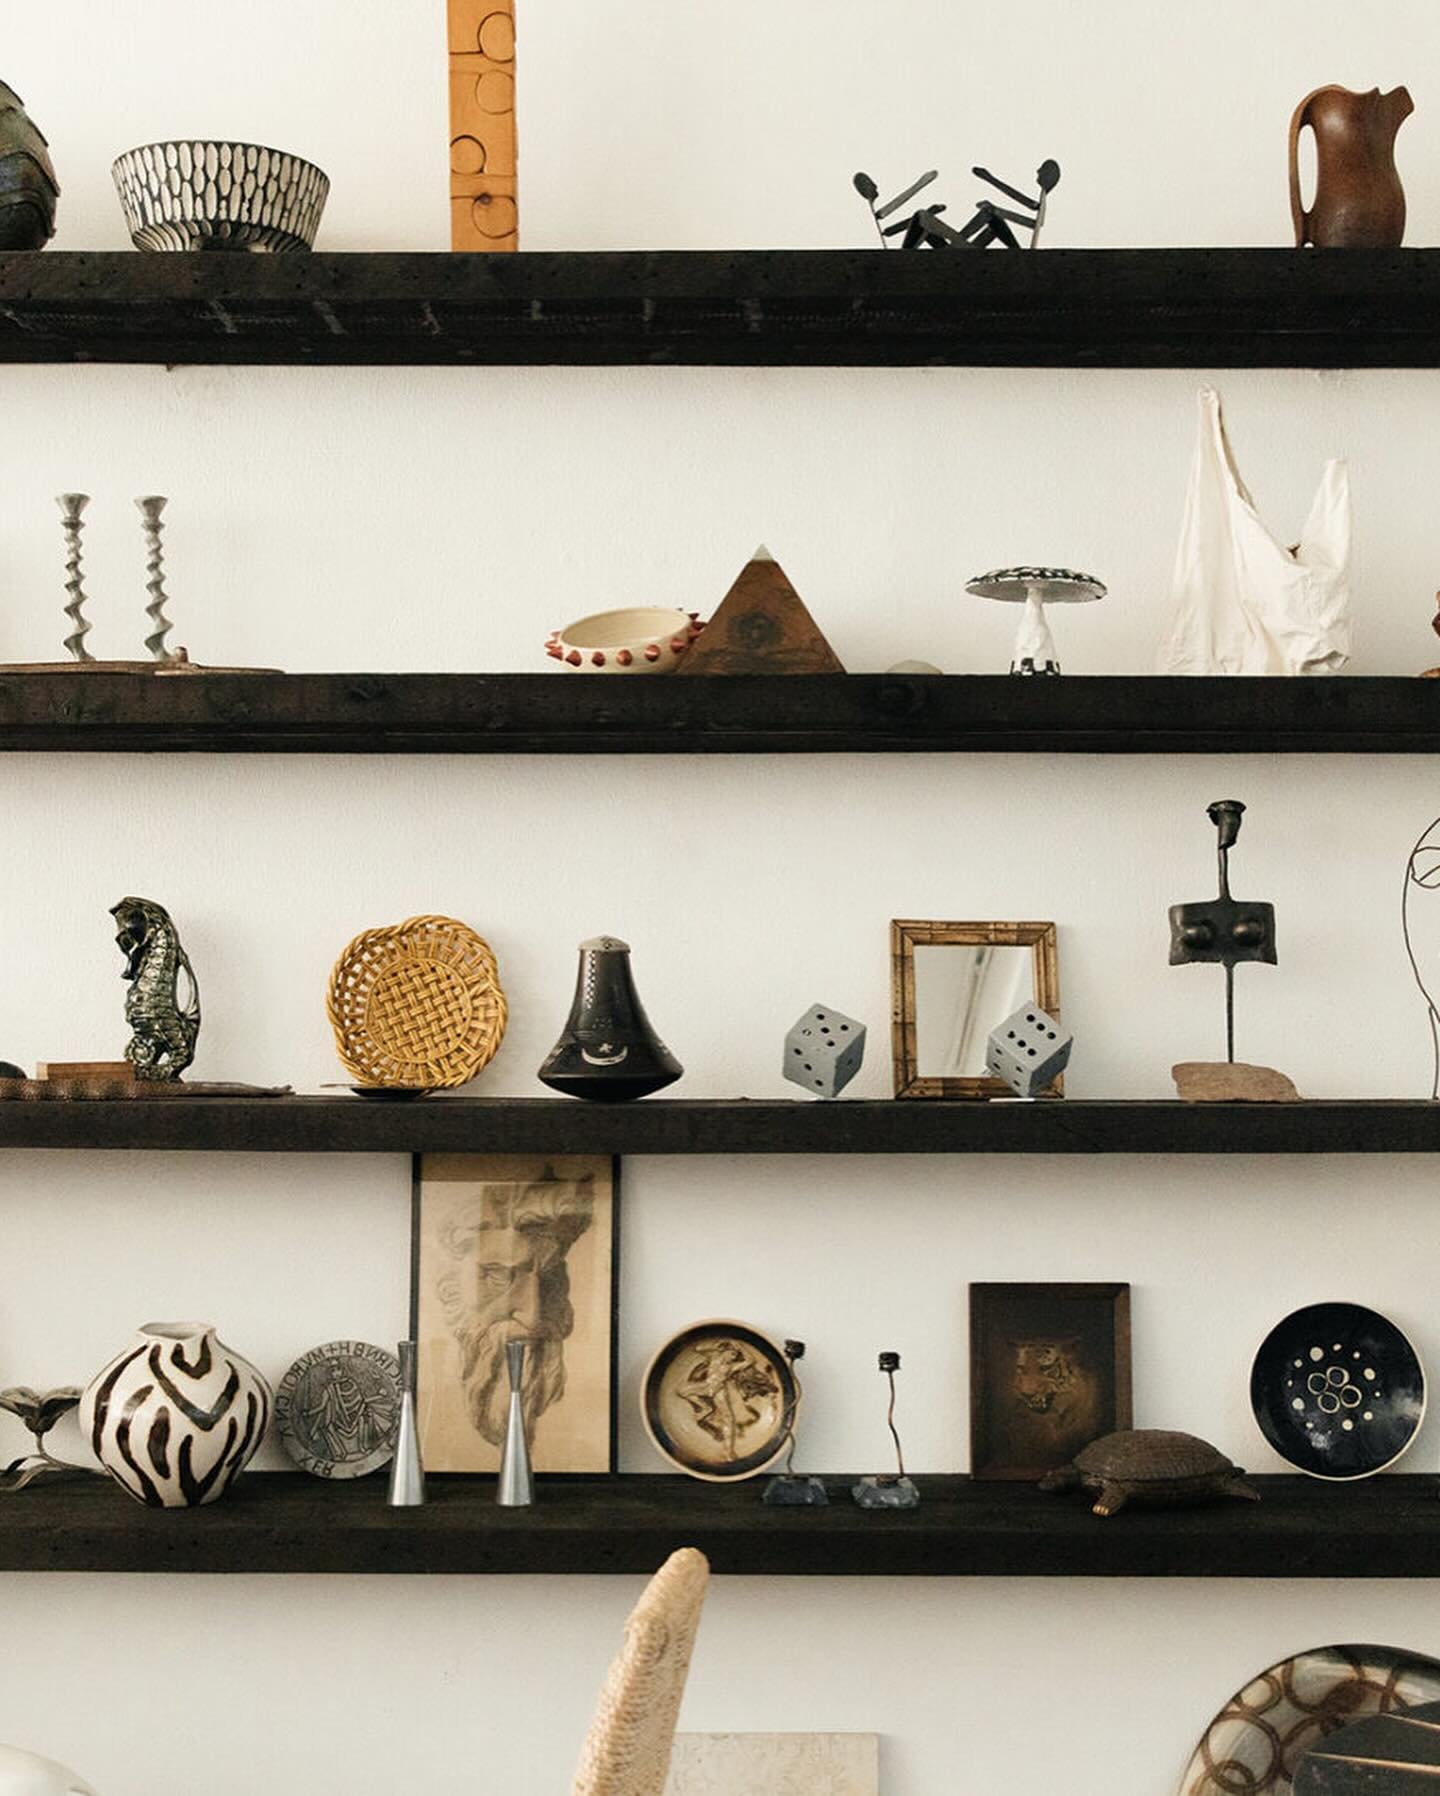 In a New Gallery Space, Hollie Bowden Shows Off Her Talent for Sourcing Minimal Maximalist Vintage Objects

 &ldquo;I never want any generic pieces in The Gallery. Every piece [there] is unique and tells a story &ndash; some pieces are extremely rare